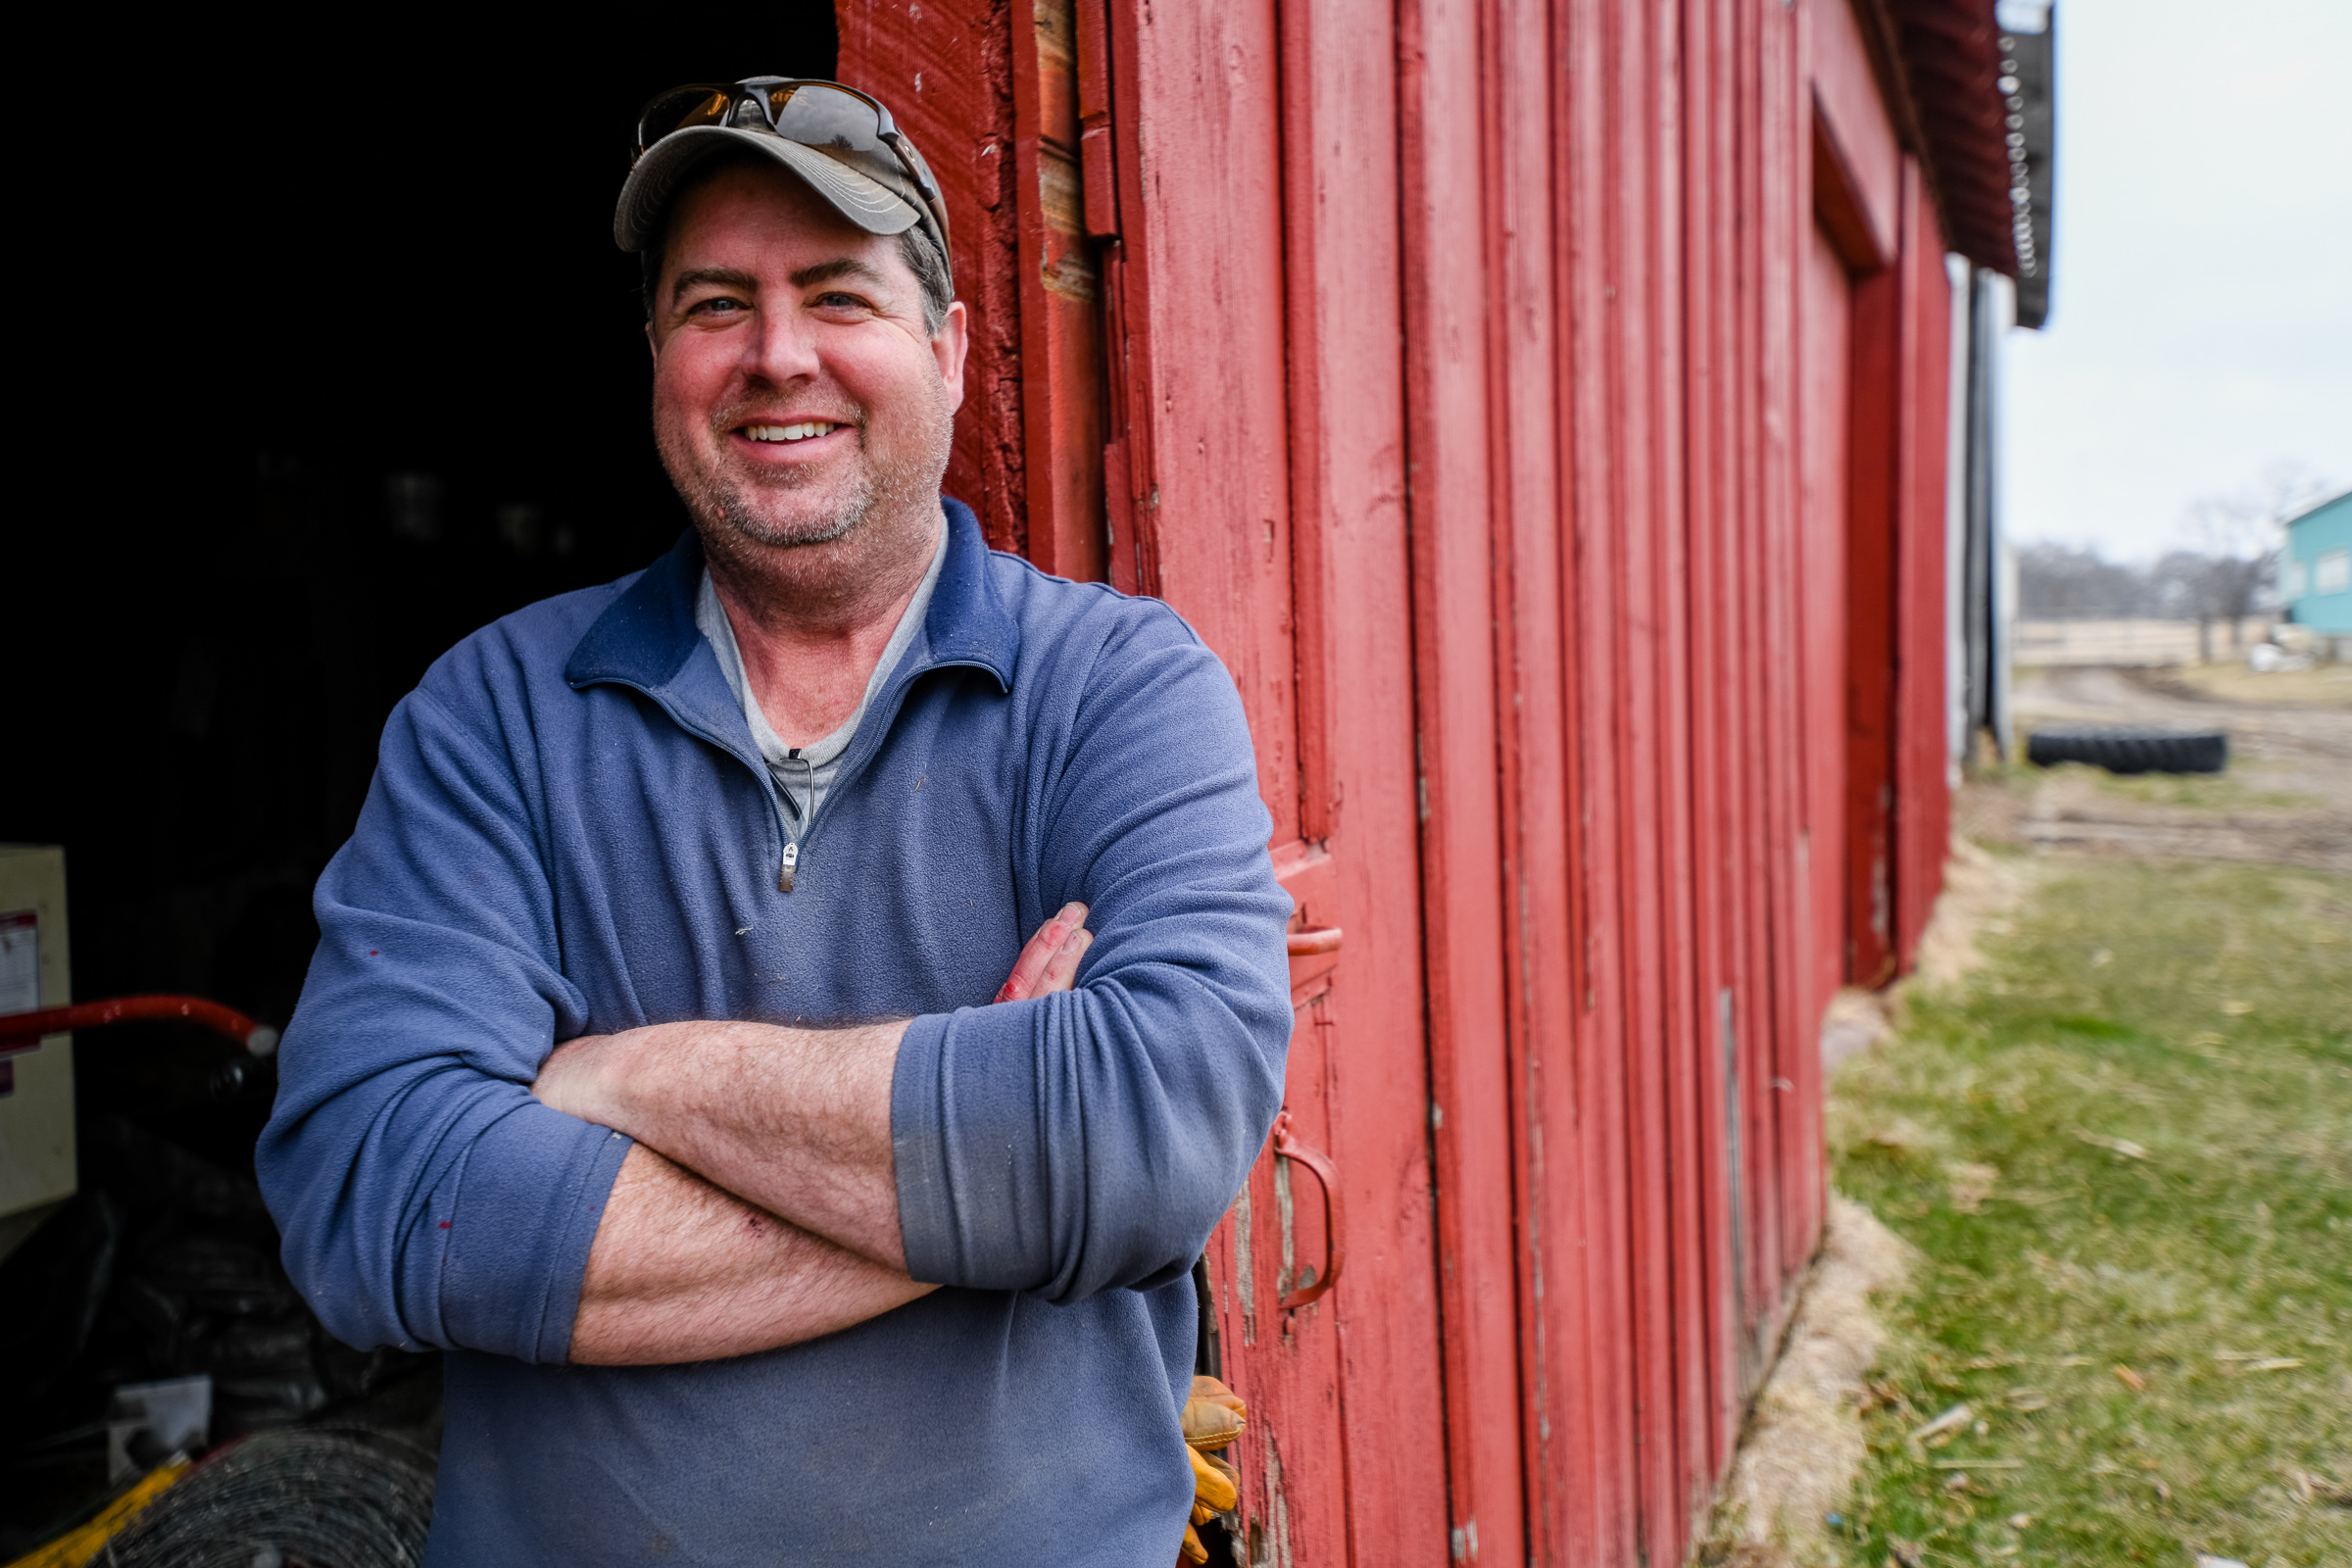 Man smiling in front of red barn